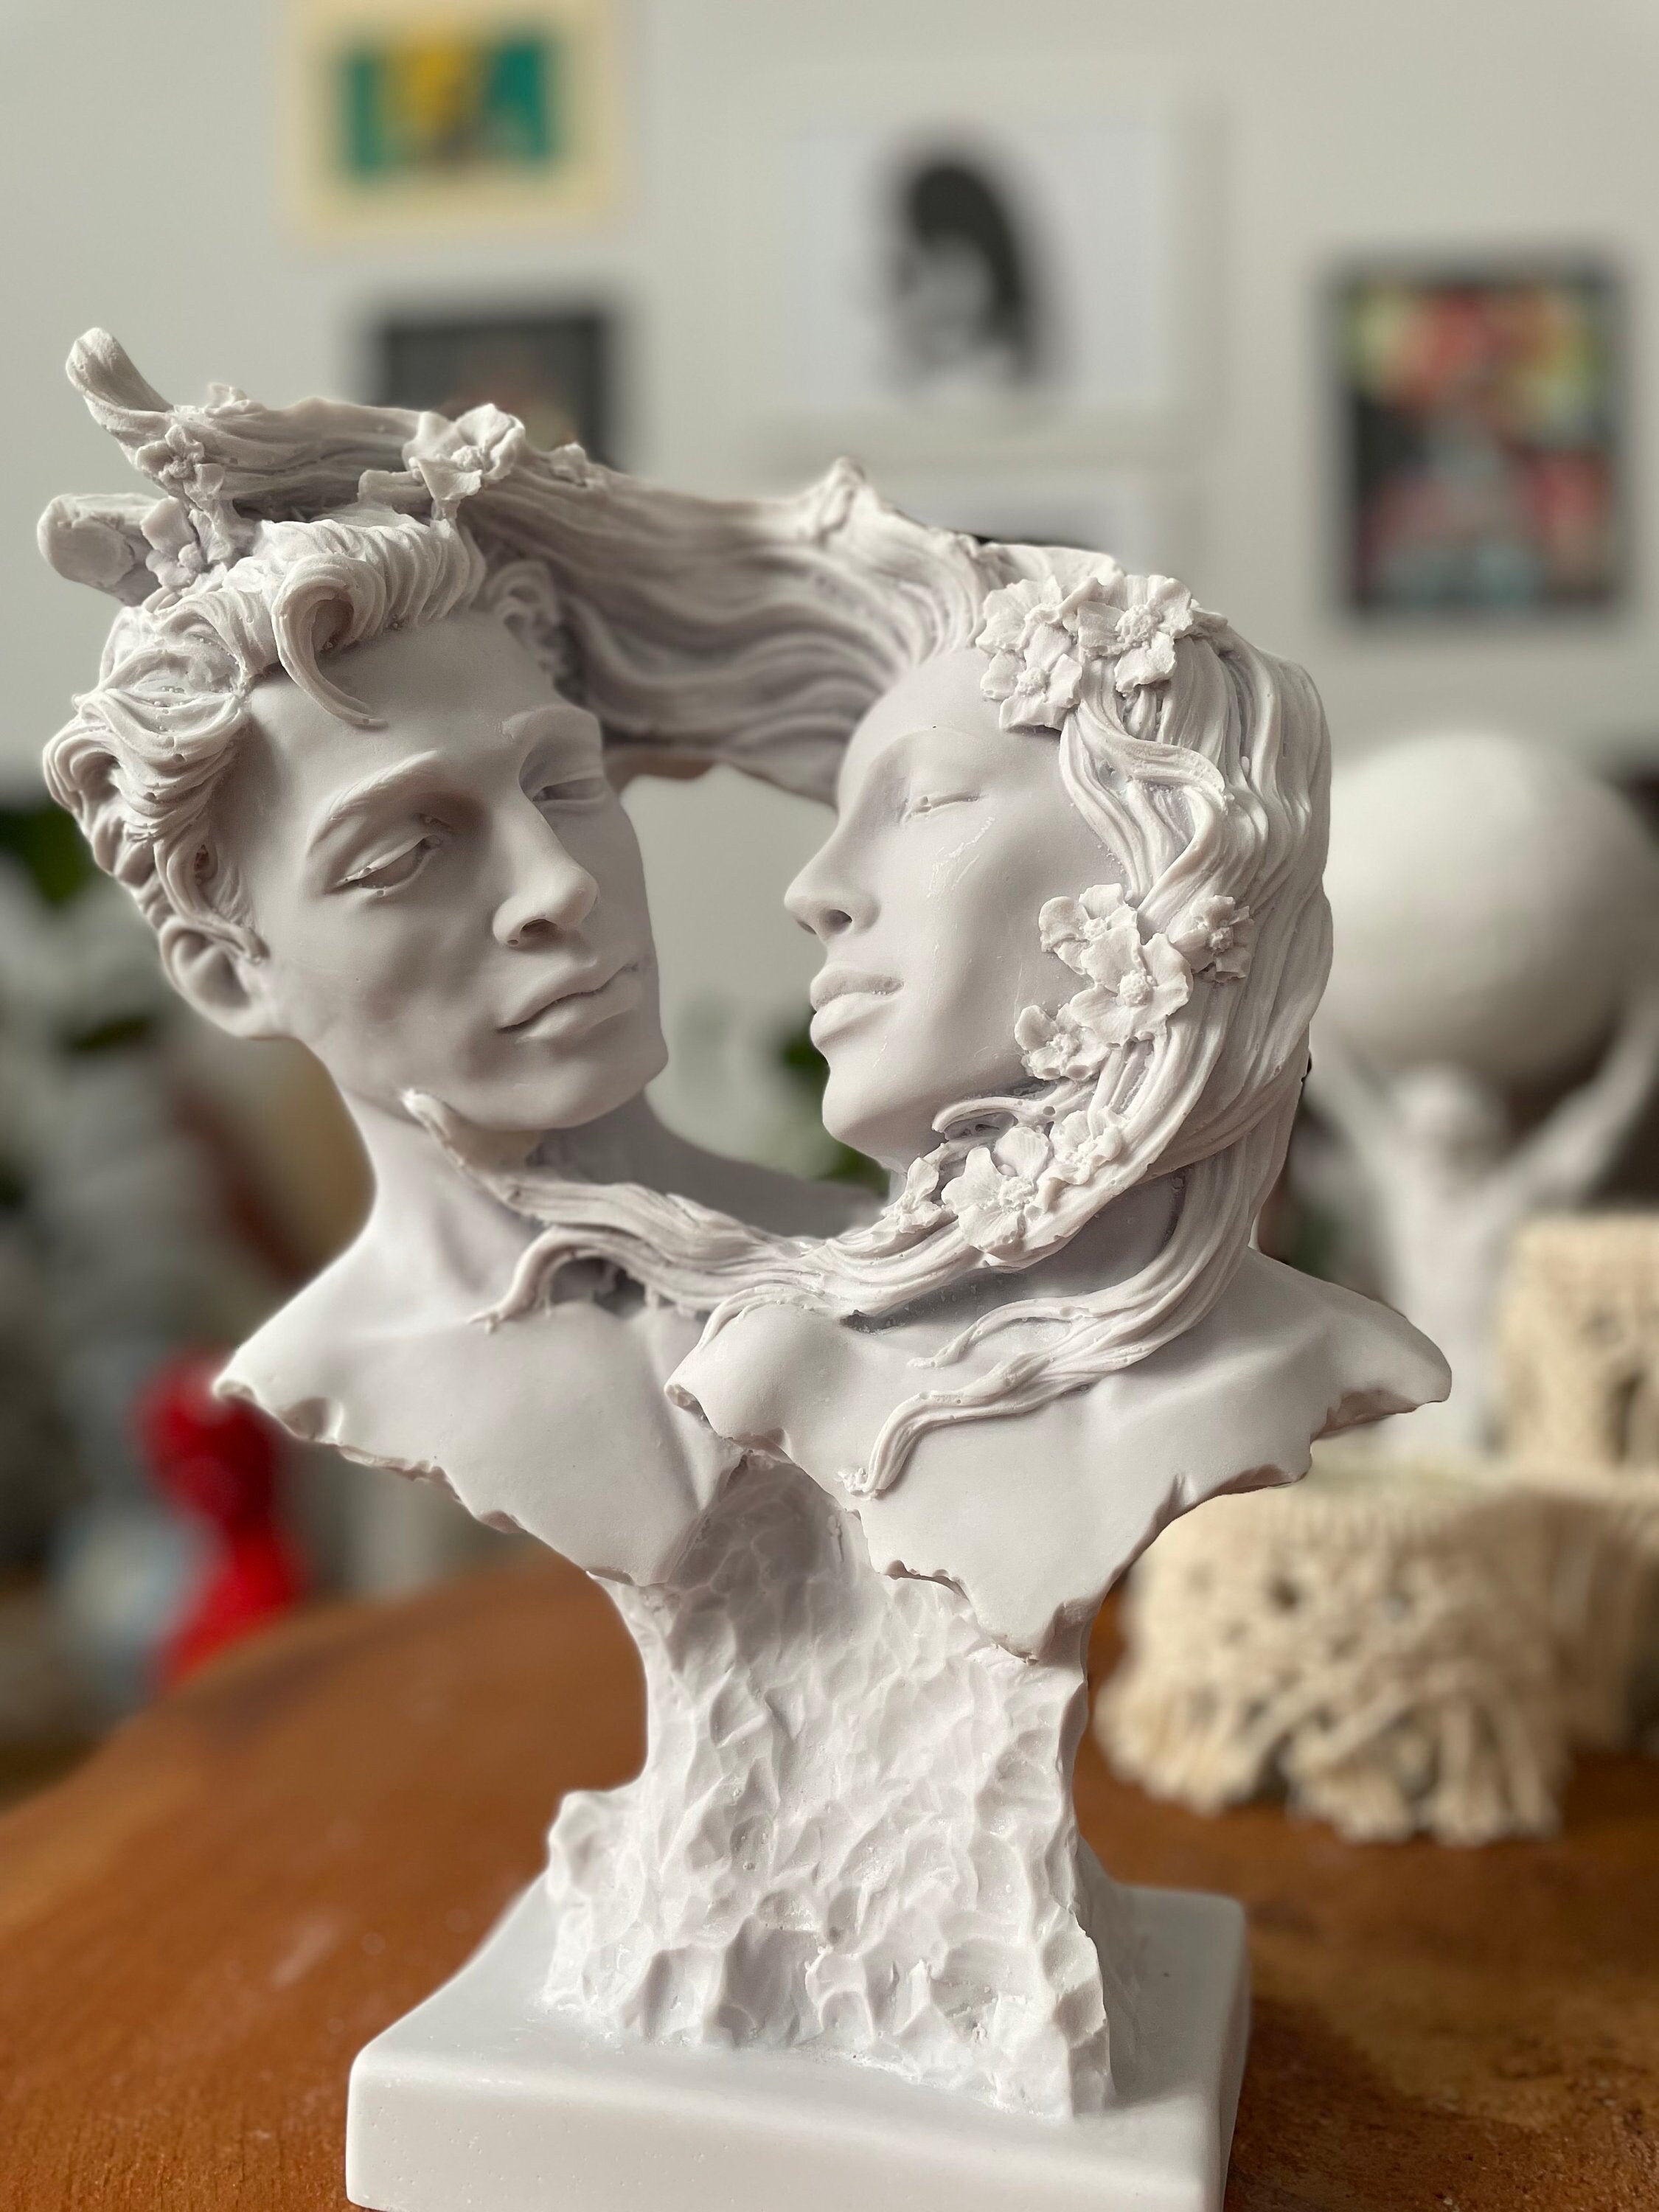 Eternal Love: Large Lover Statue Sculpture for Valentine's Day Decor